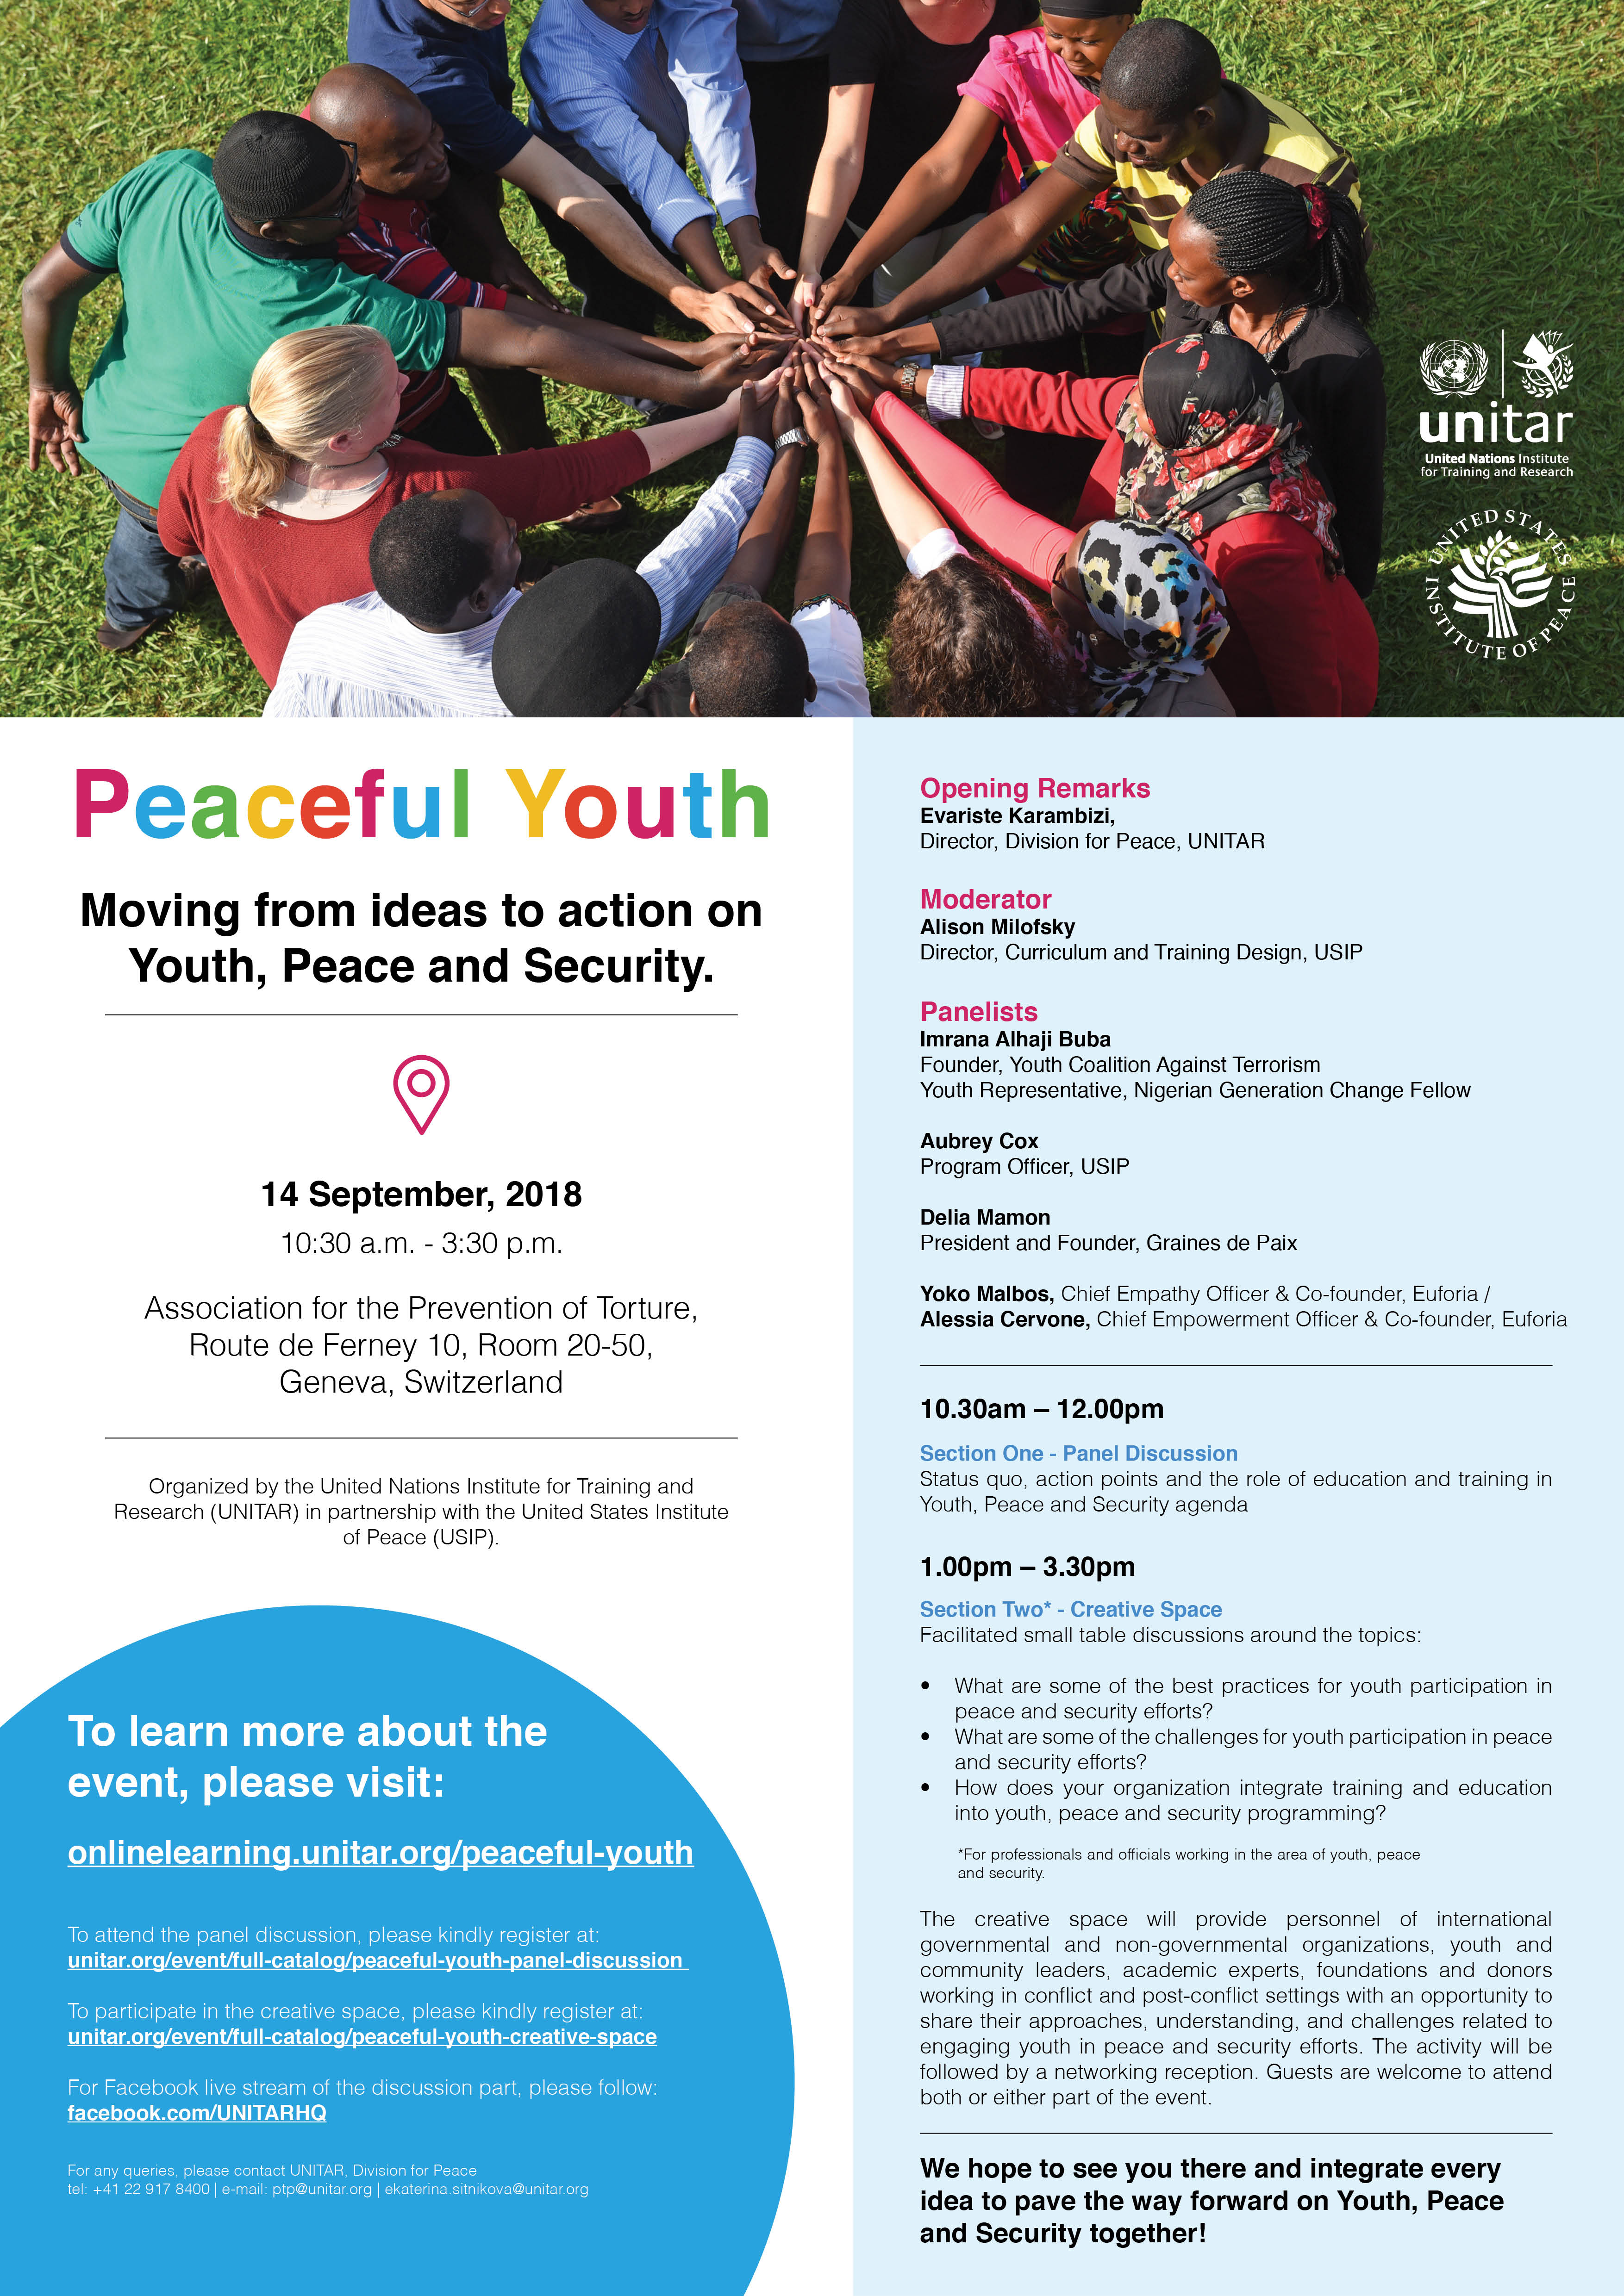 Peaceful Youth - Moving from ideas to action on Youth, Peace and Security